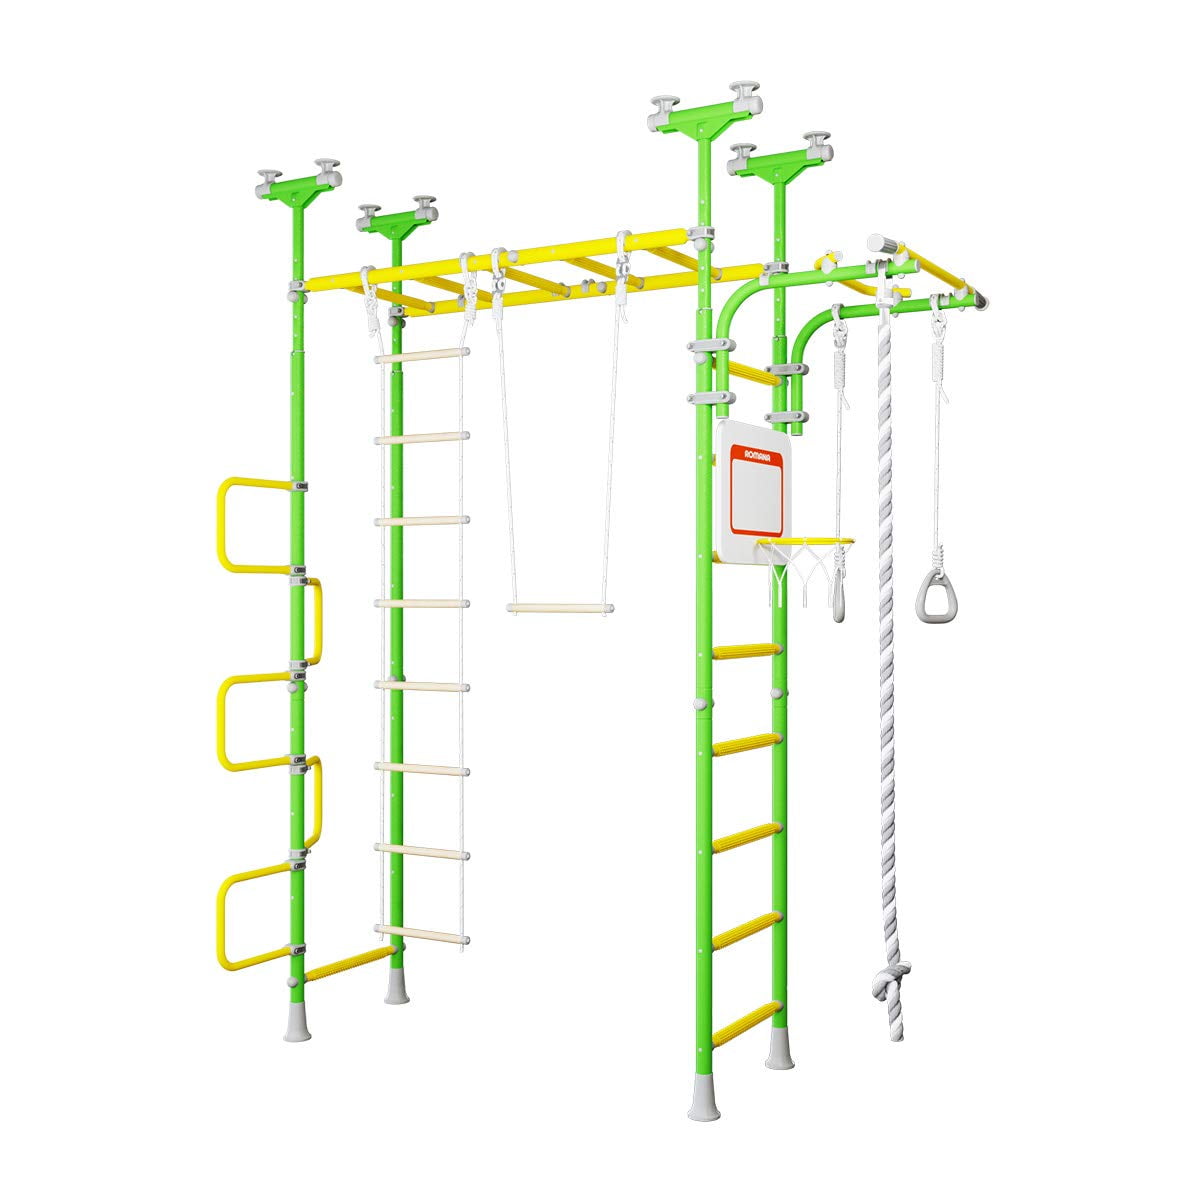 and Trapeze Bar Suit for Gyms Rope - Playground Set for Kids with Gymnastic Rings Schools and Kids Room Childrens Indoor Home Gym Swedish Wall Comet 5 